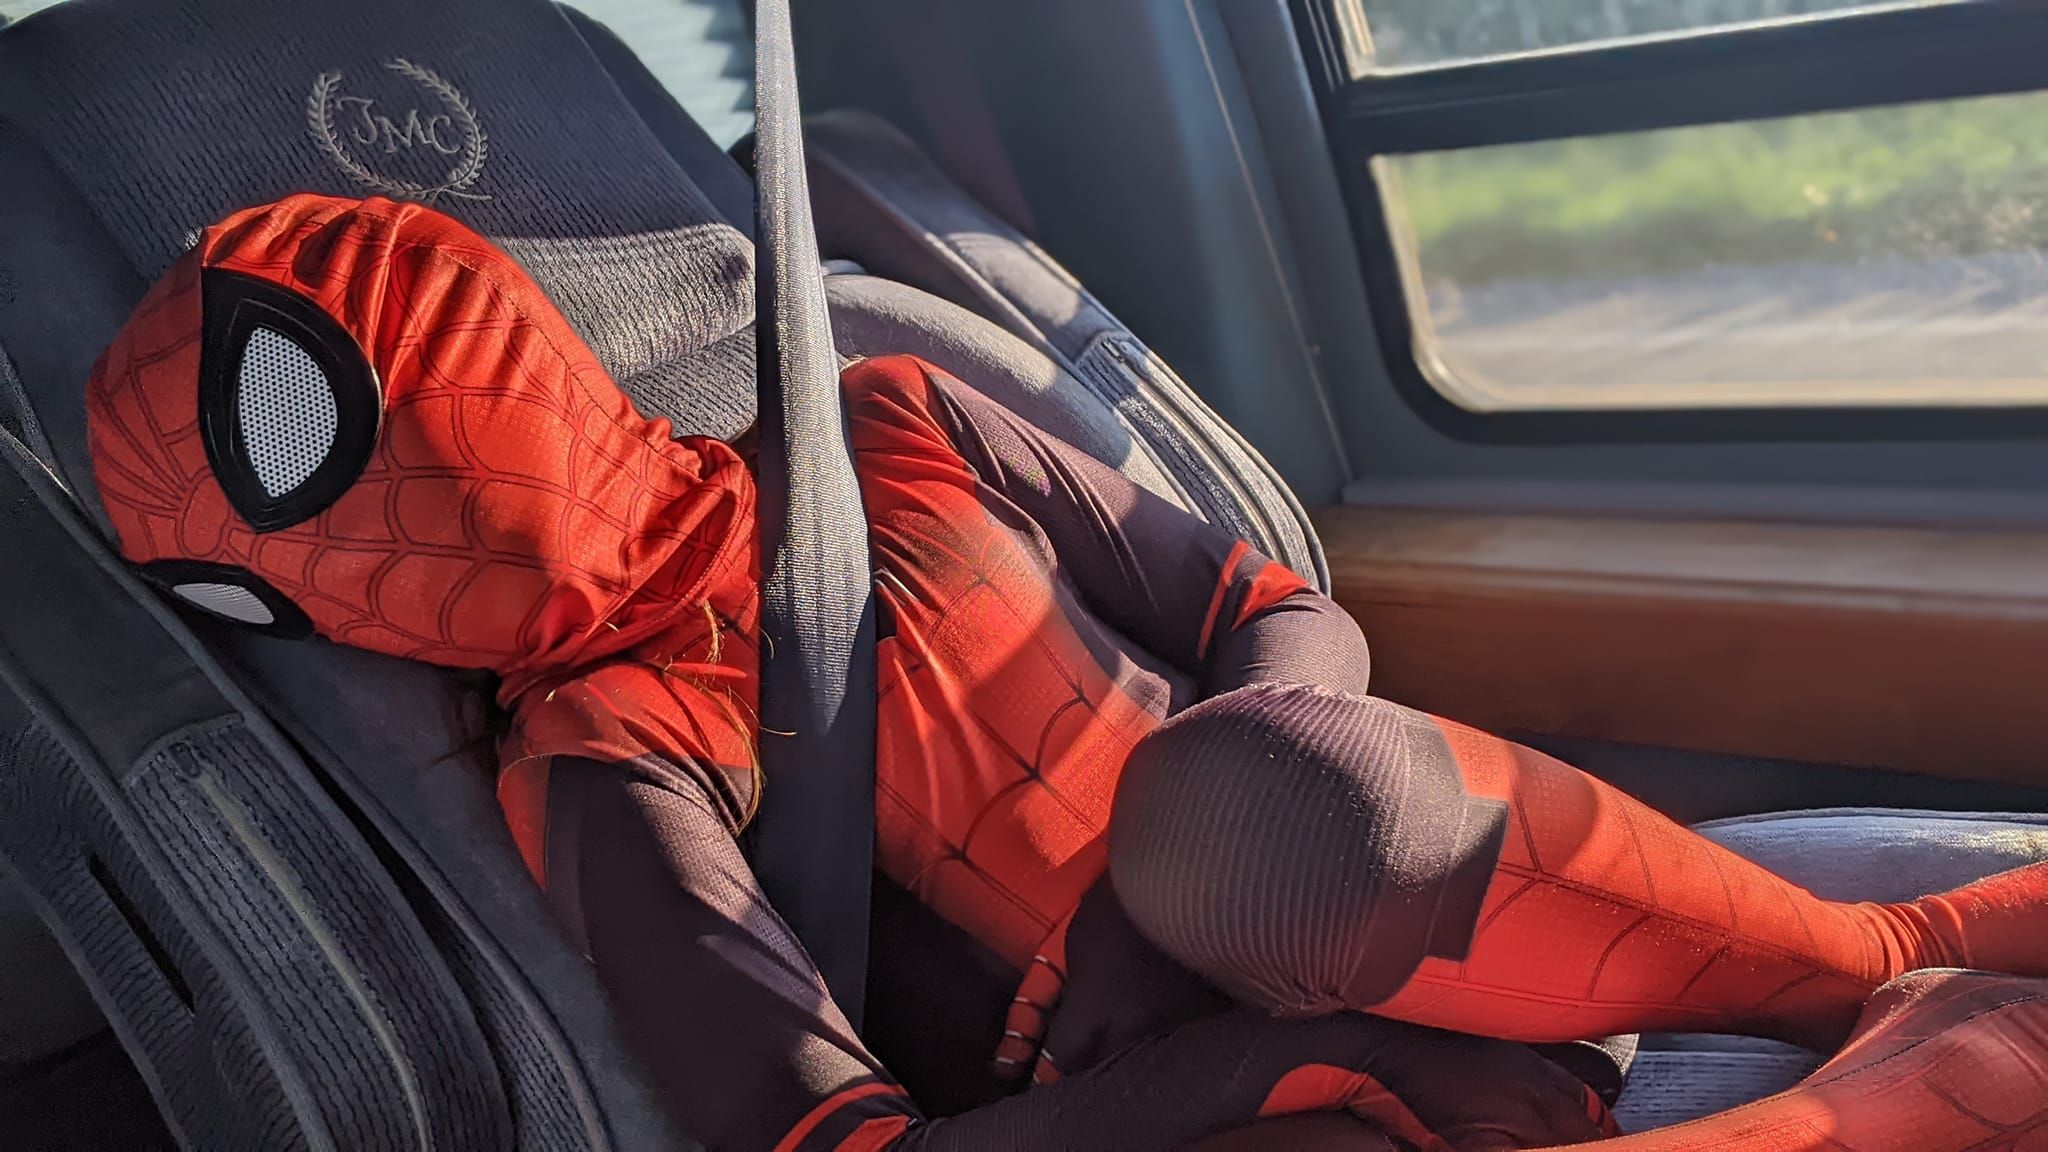 My nephew, Spider-Man, after a long day.